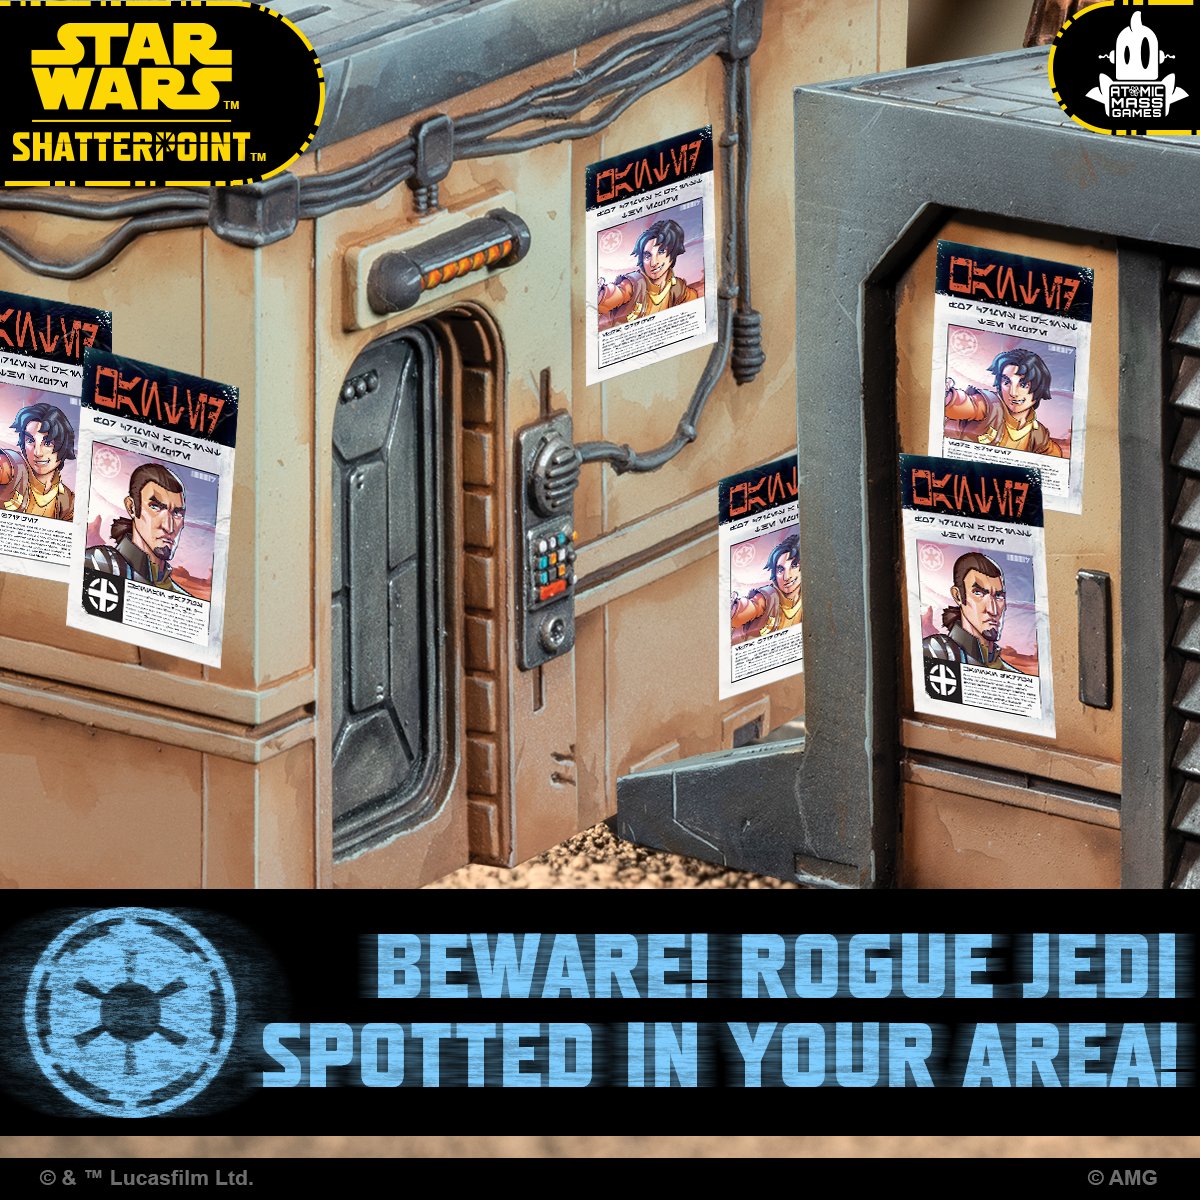 Dangerous Jedi have joined the Rebellion. Report any contact with this Rebel cell to the authorities!